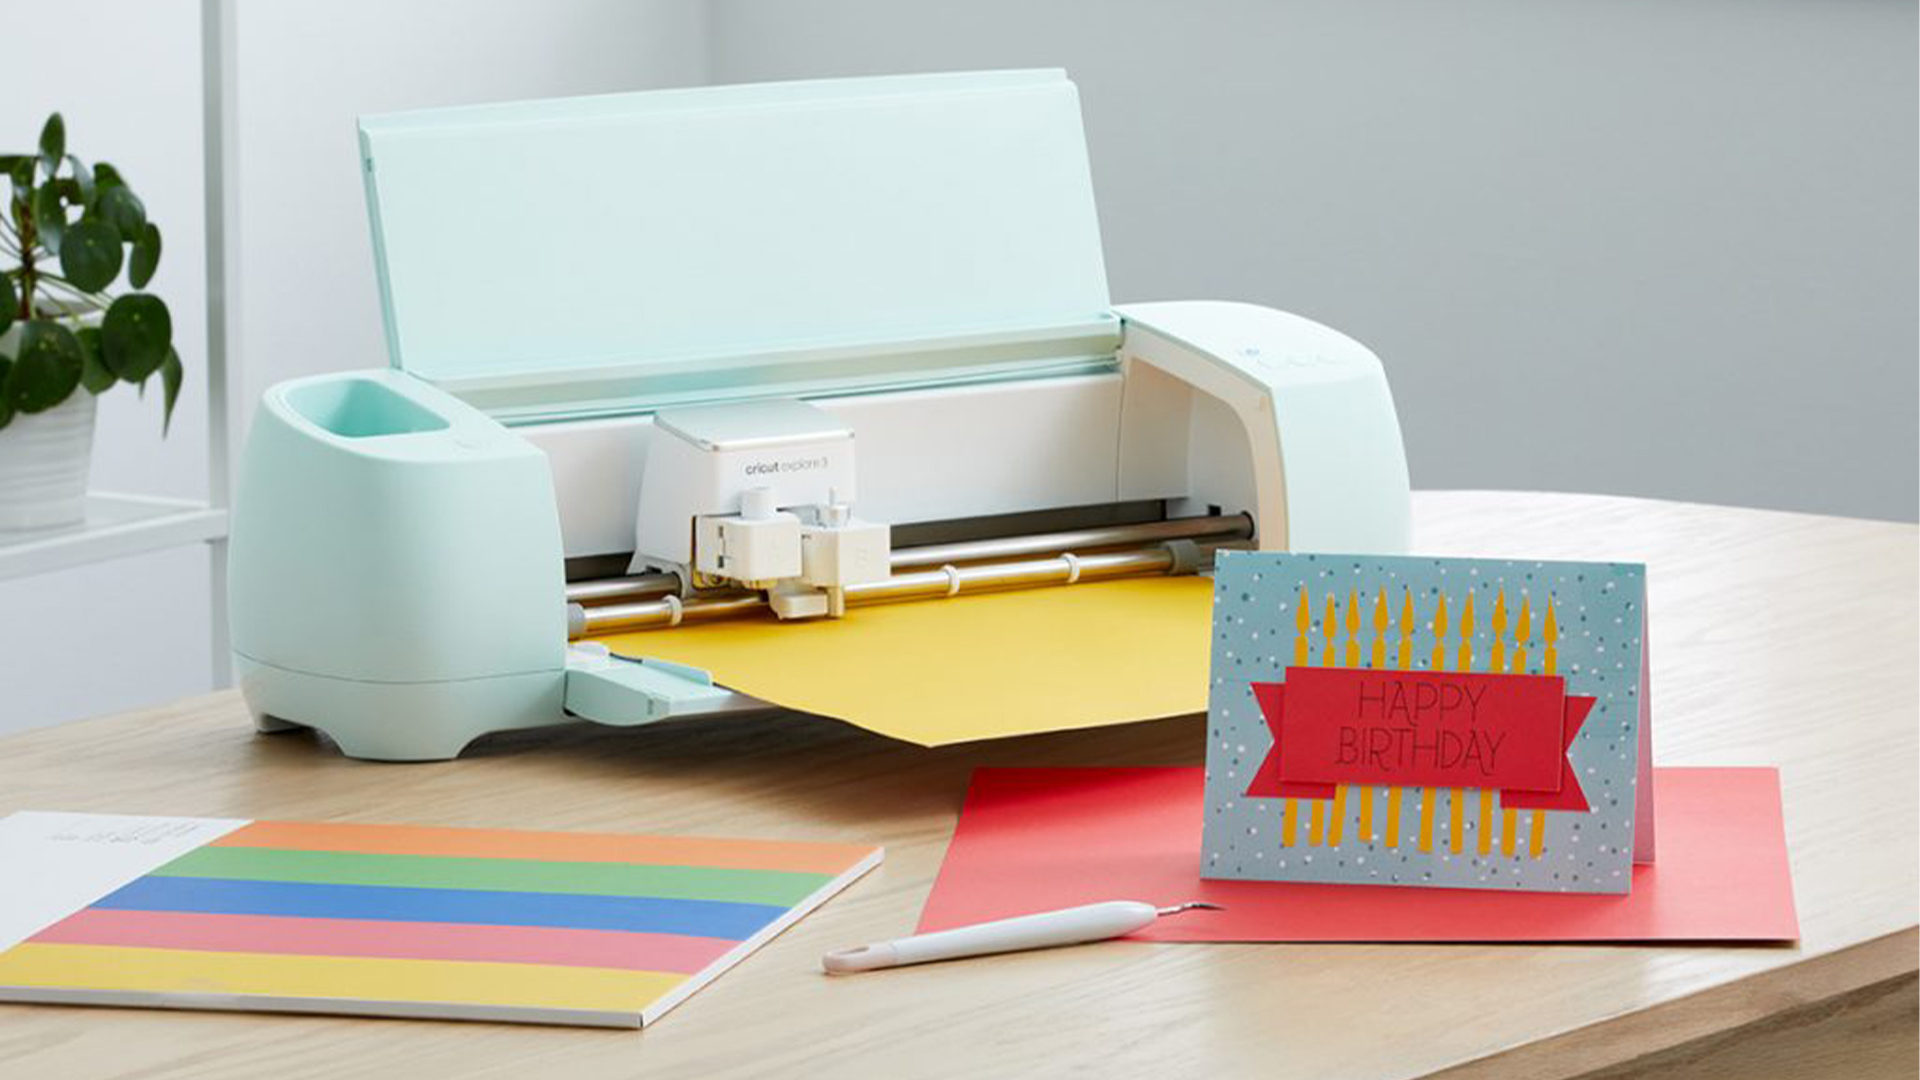 Projects You Can Make With The New Cricut Explore 3 and Cricut Maker 3 -  Creative Fabrica